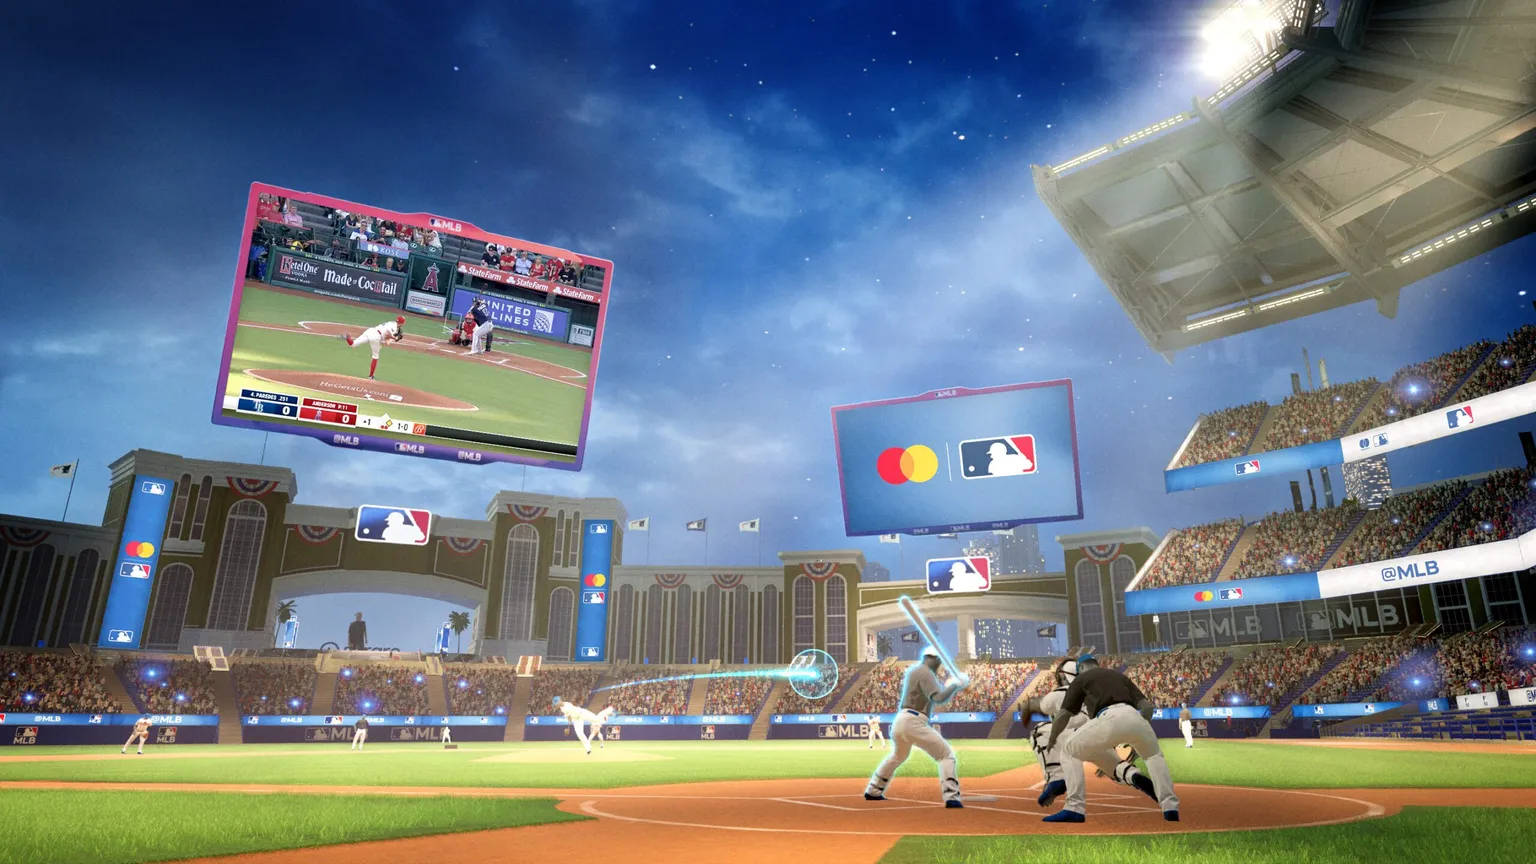 A preview of MLB's virtual stadium in action. Image: Major League Baseball